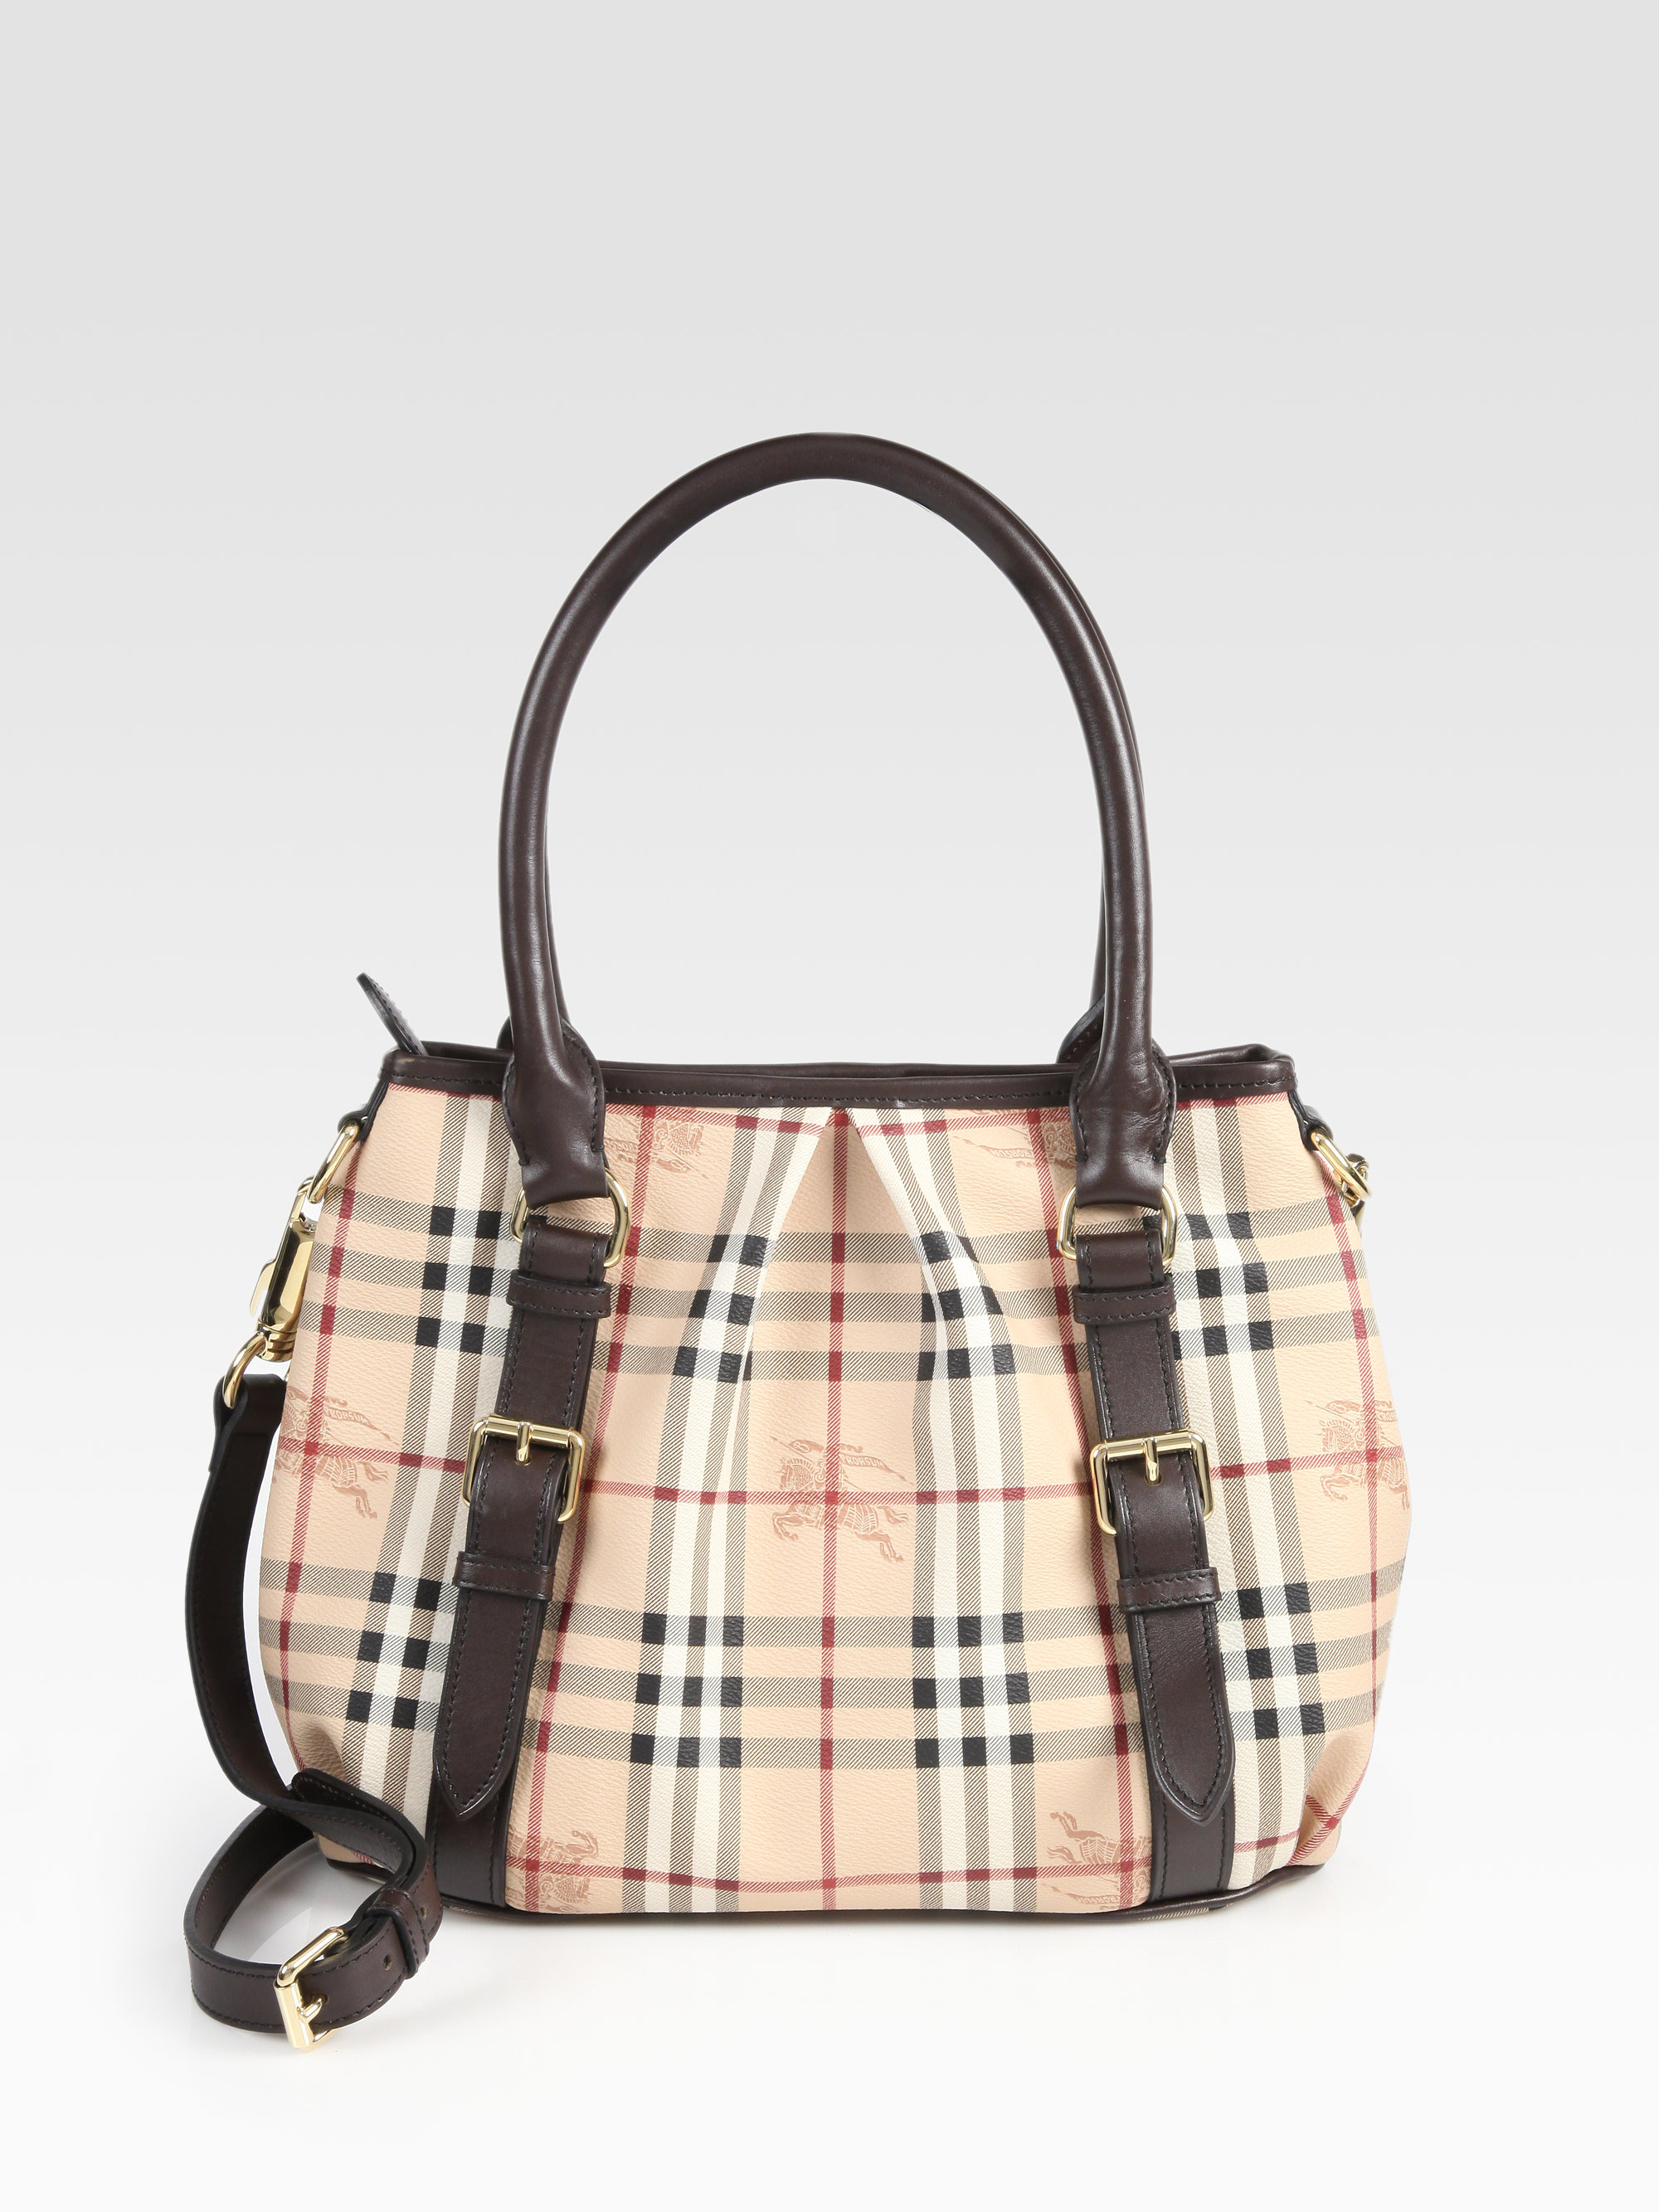 Burberry Small Canvas Leather Check Bag in Chocolate (Brown) - Lyst